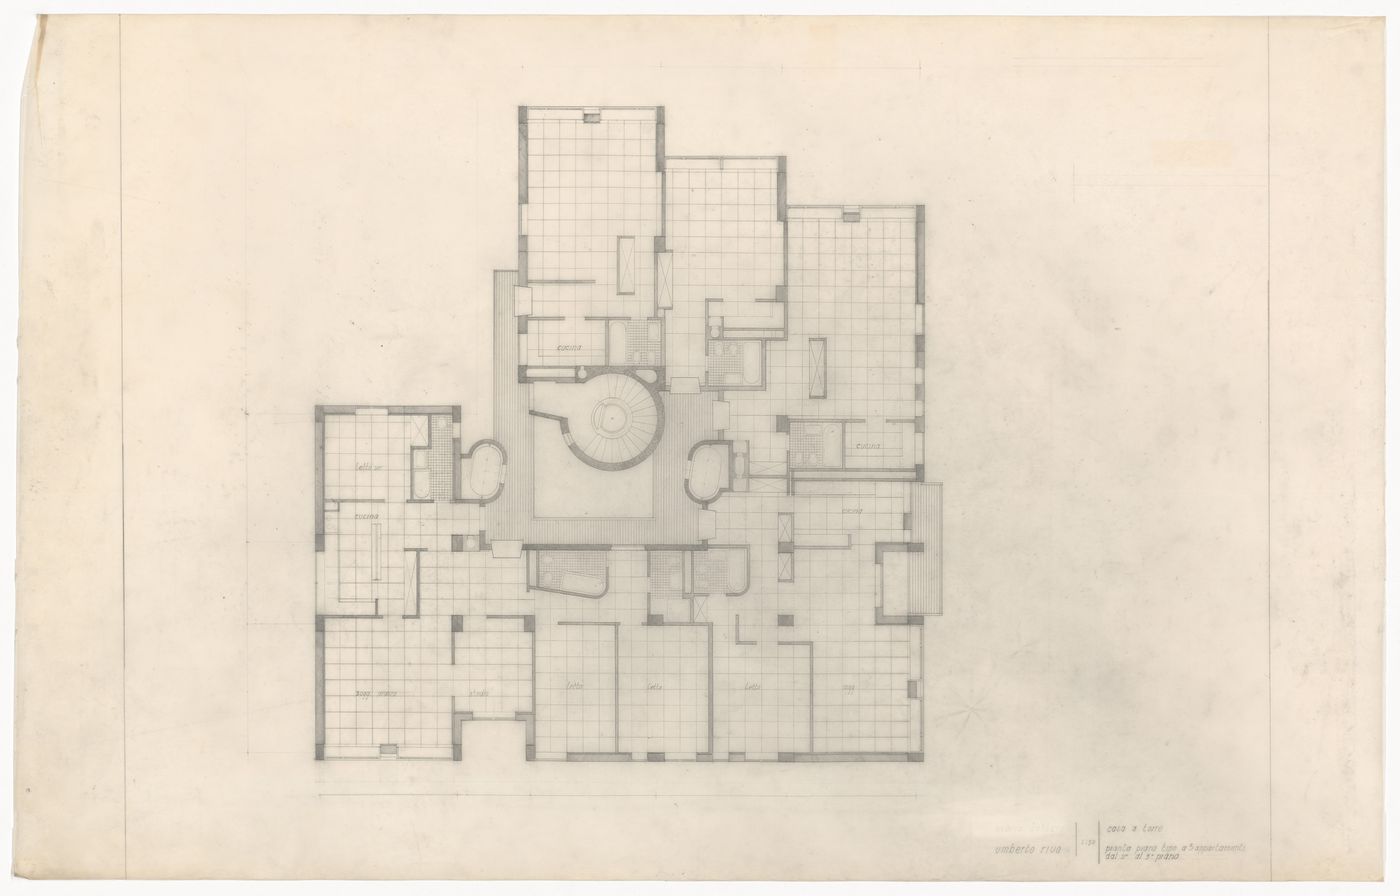 Typical floor plan with 5 apartments for Casa a torre, Italy